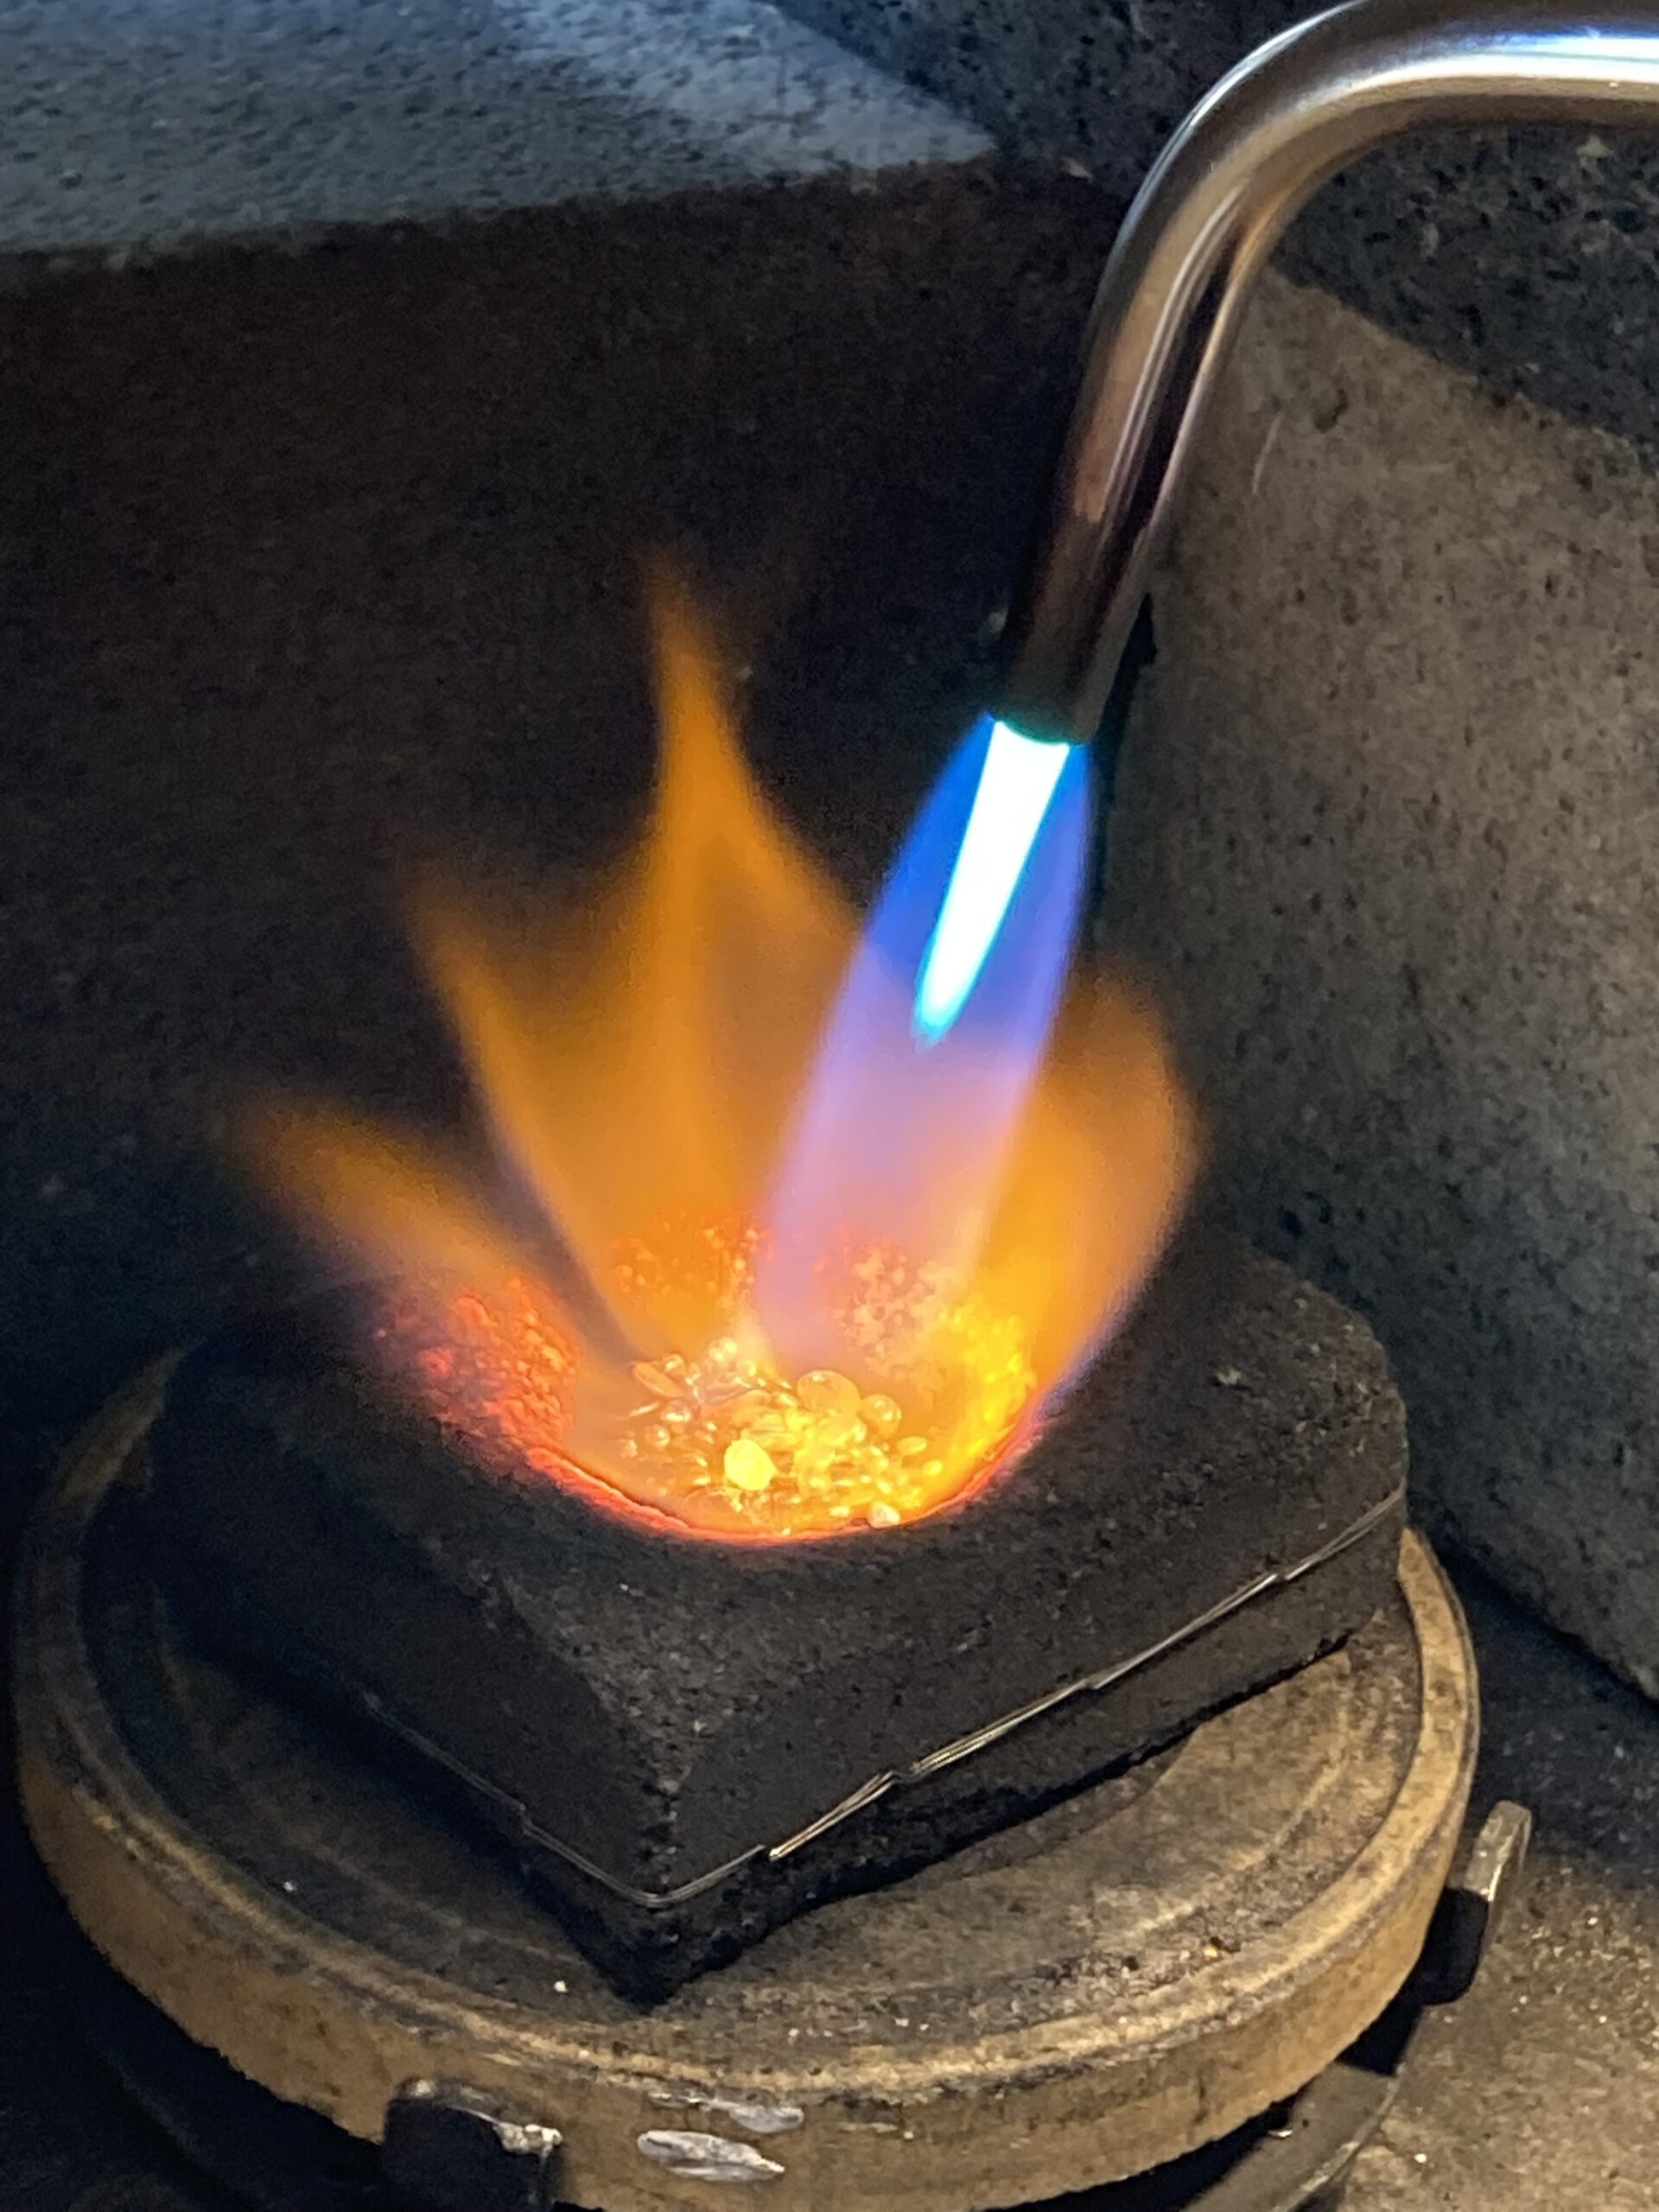 Gold smelting in Lois Gore's workspace.